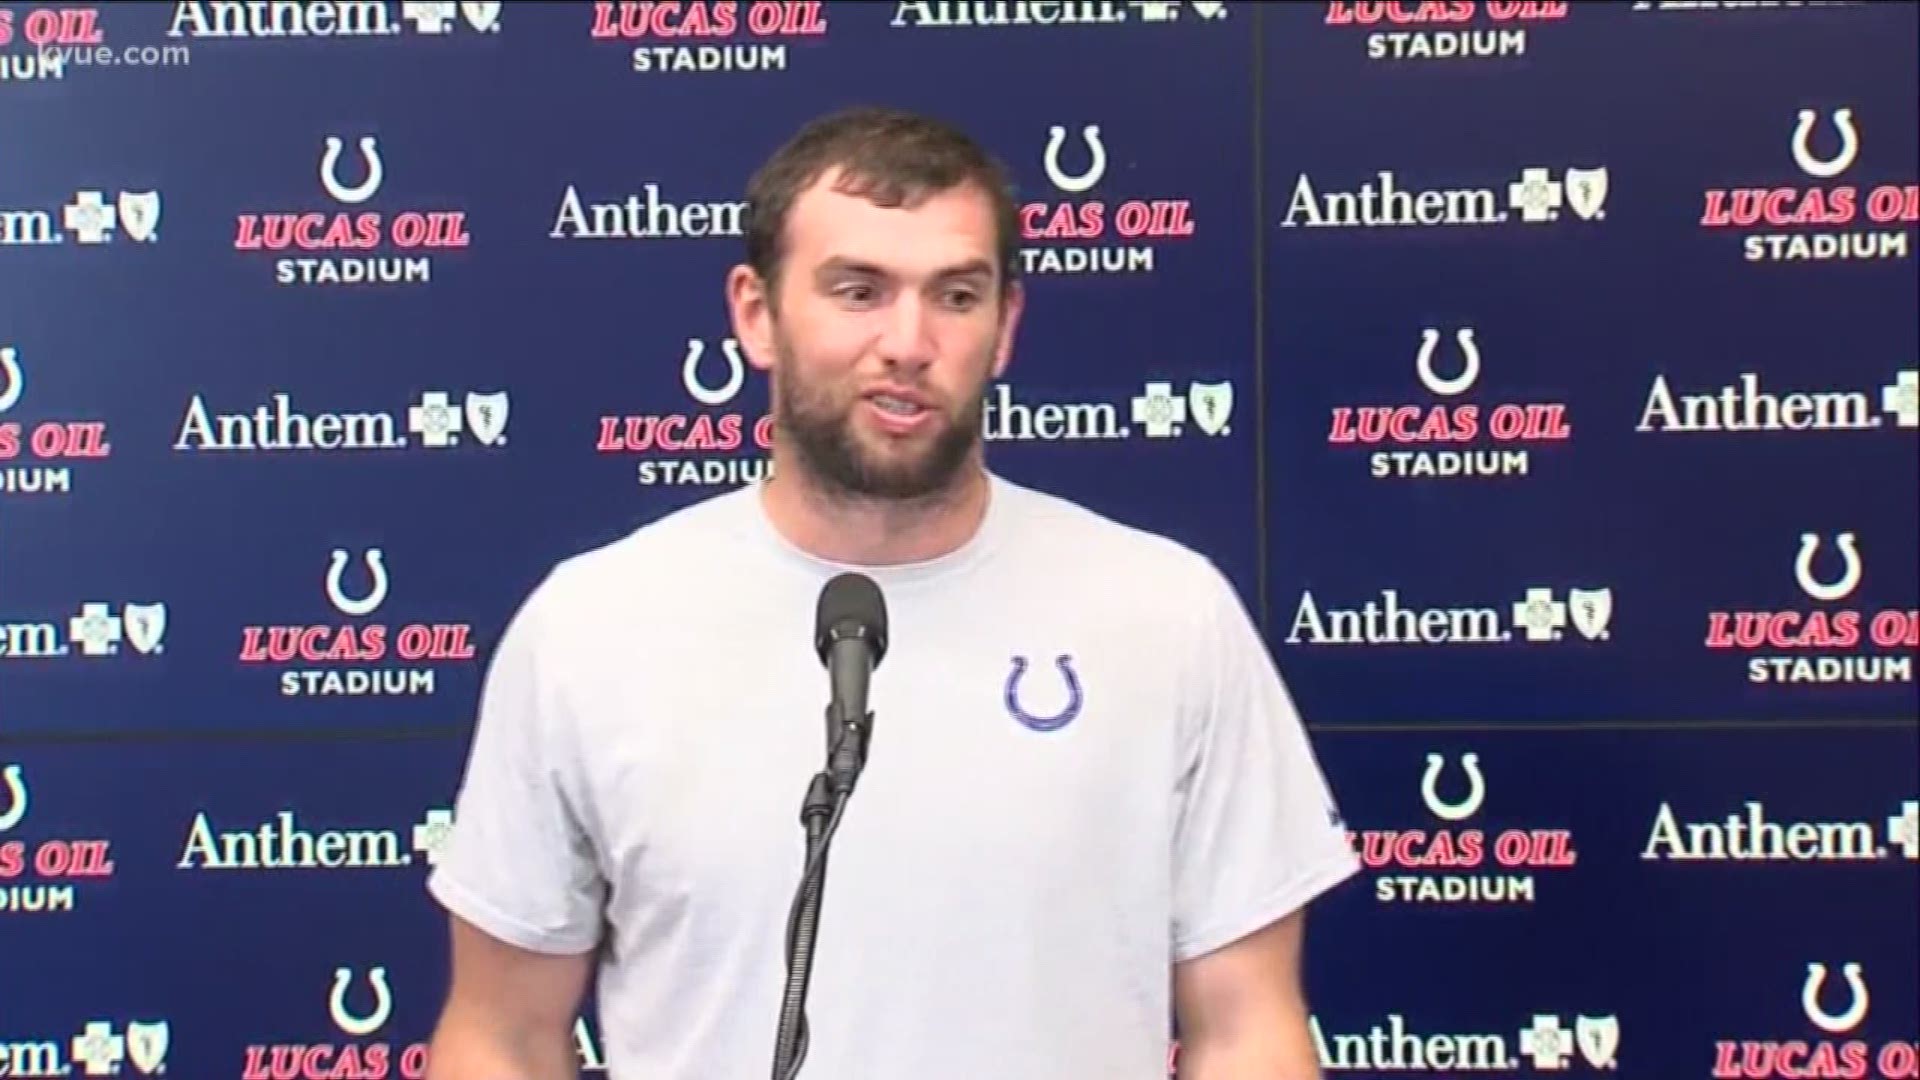 Indianapolis Colts quarterback Andrew Luck announced he would be retiring from the NFL.